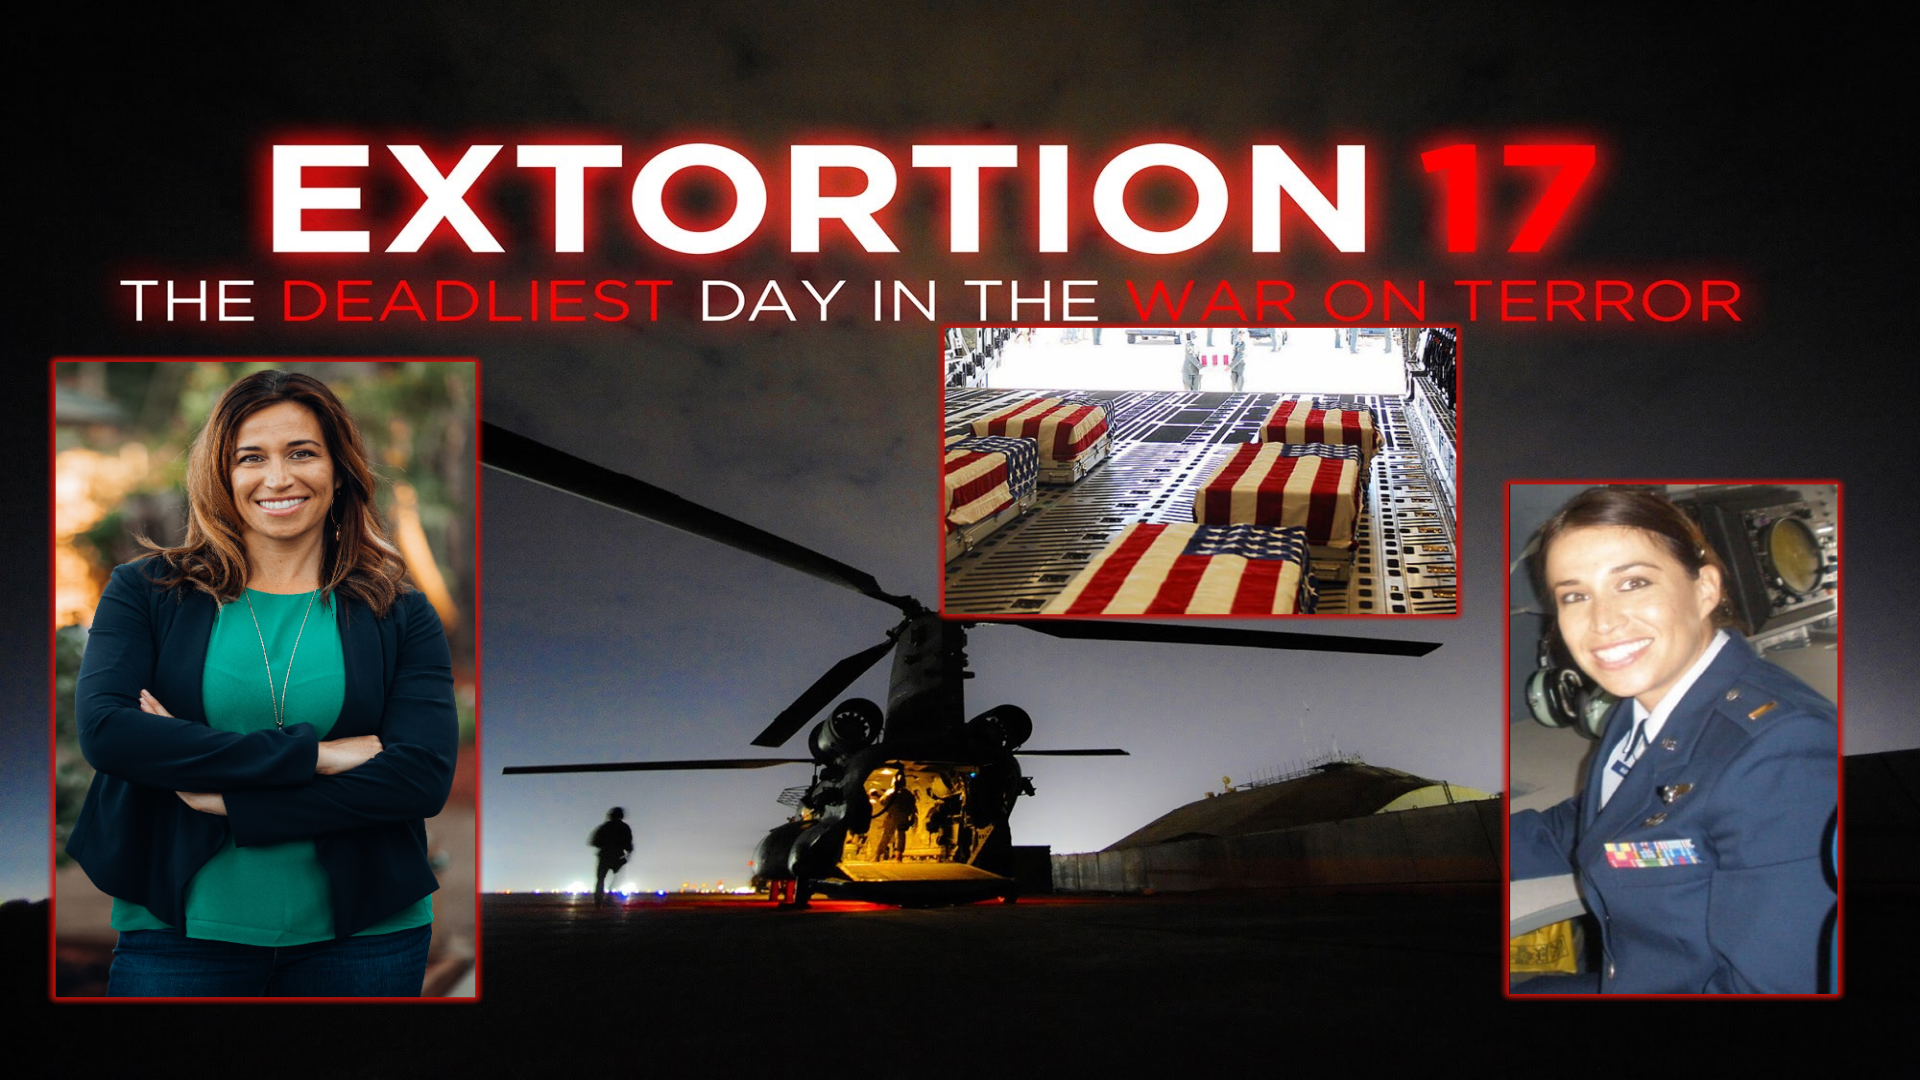 Retired Air Force Captain On Extortion 17: Someone Was Pushing This Mission – Didn’t Feel Right (Video)